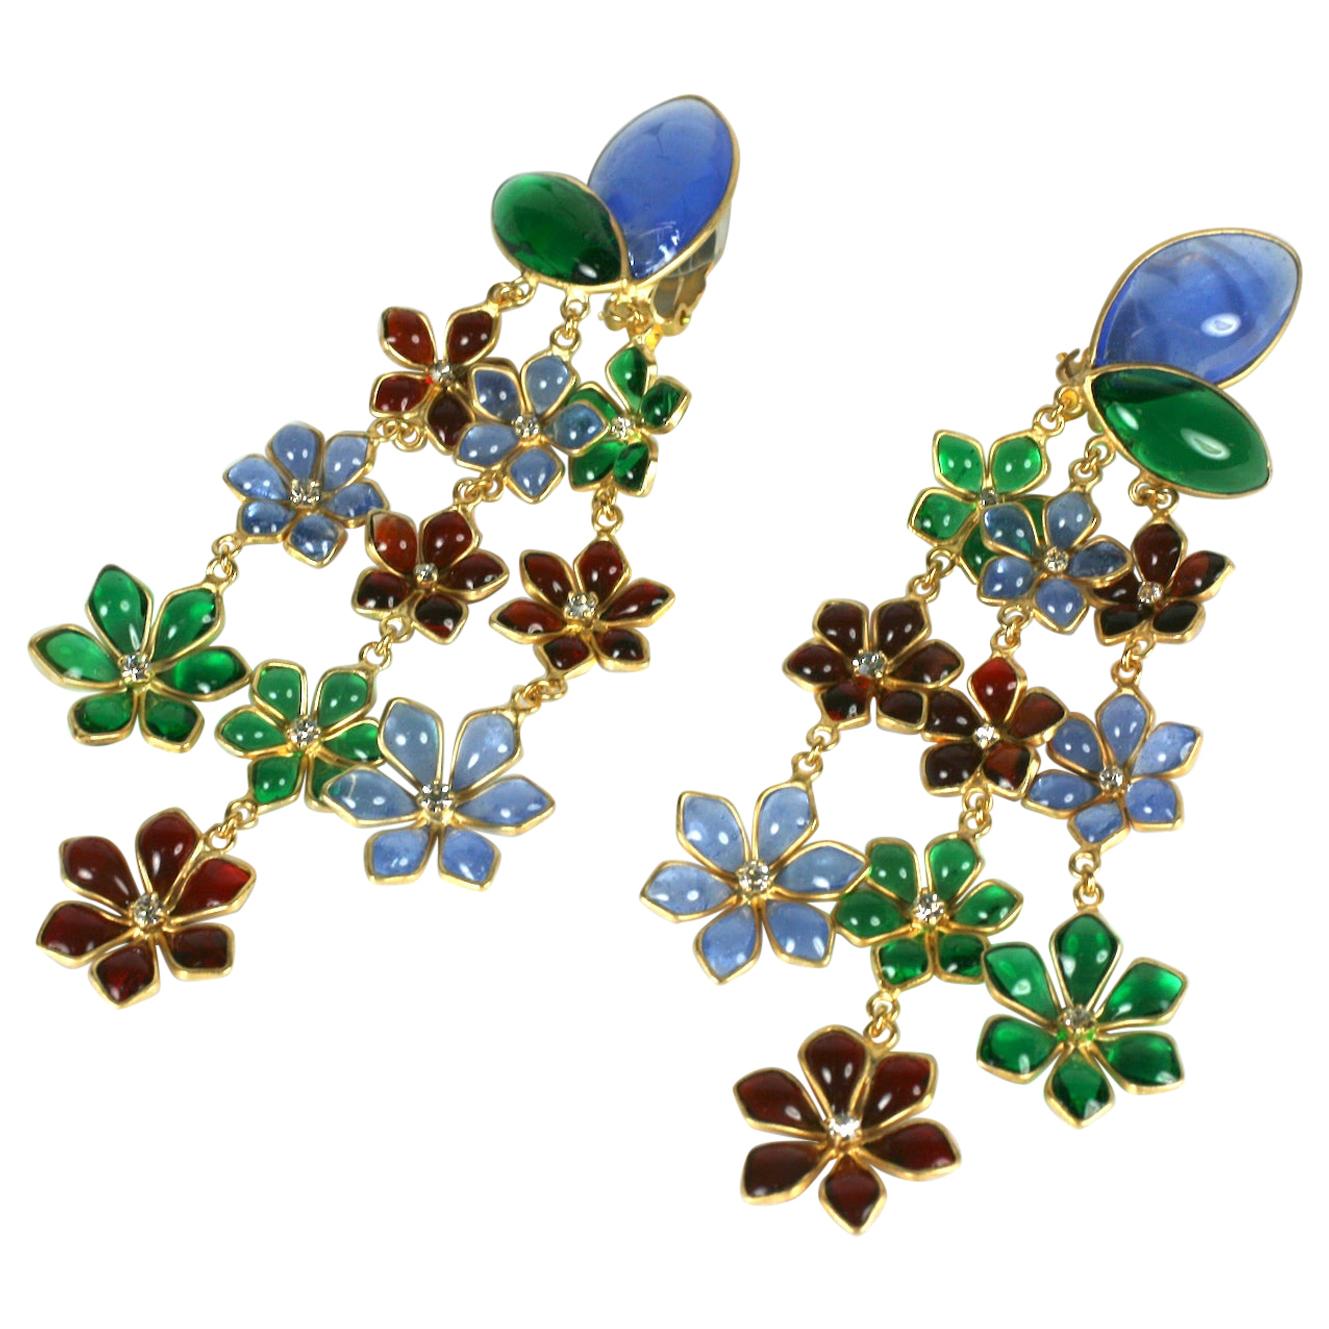  Maison Gripoix Anglo Indian Floral Cascade Earclips